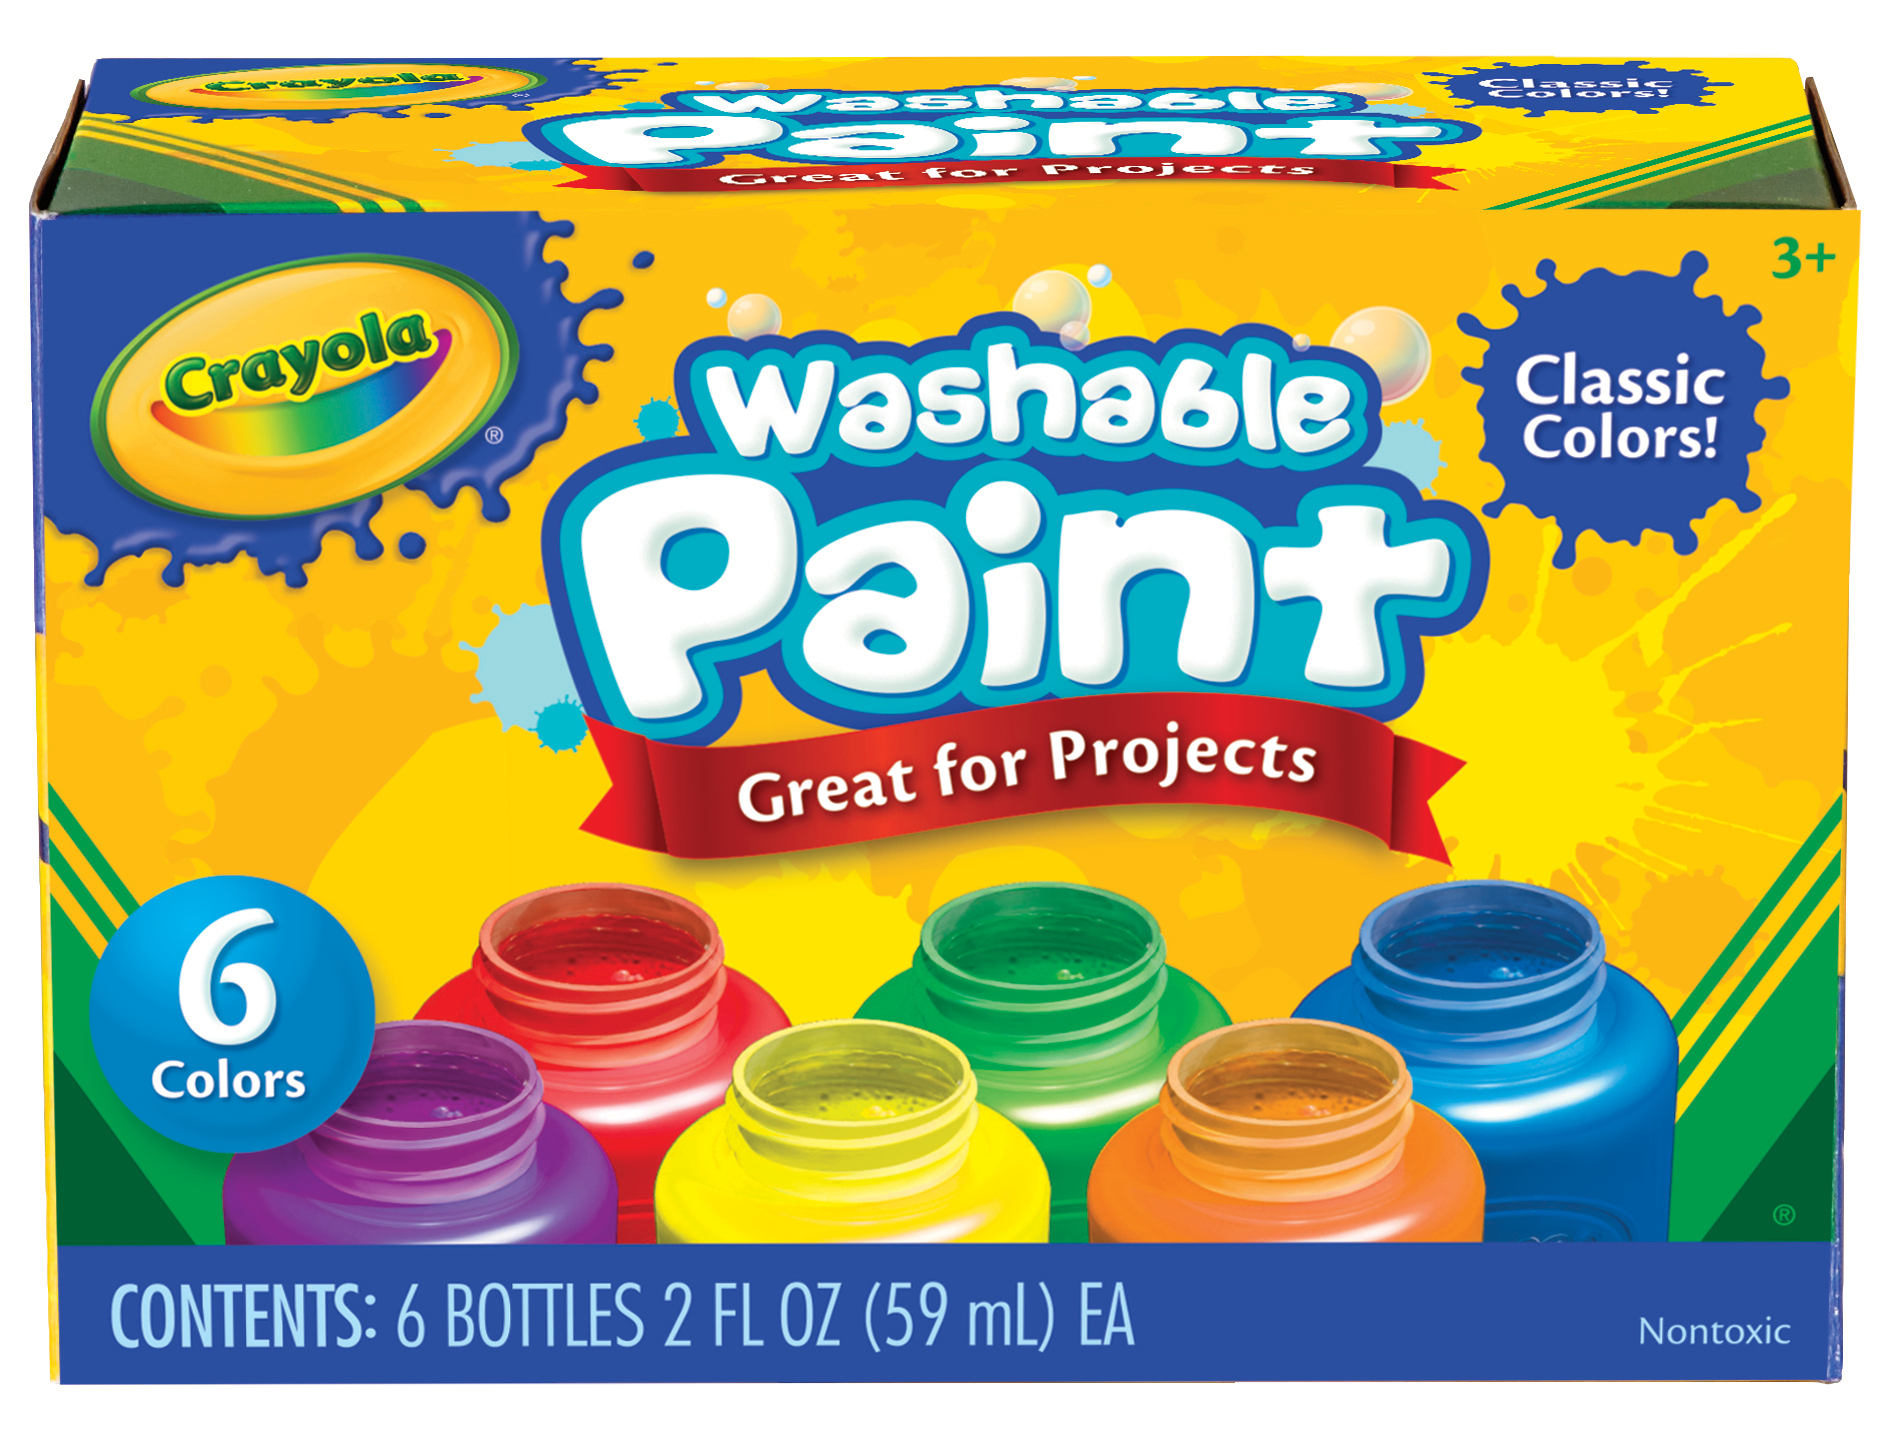 Crayola Washable Project Paint - 6 Colors